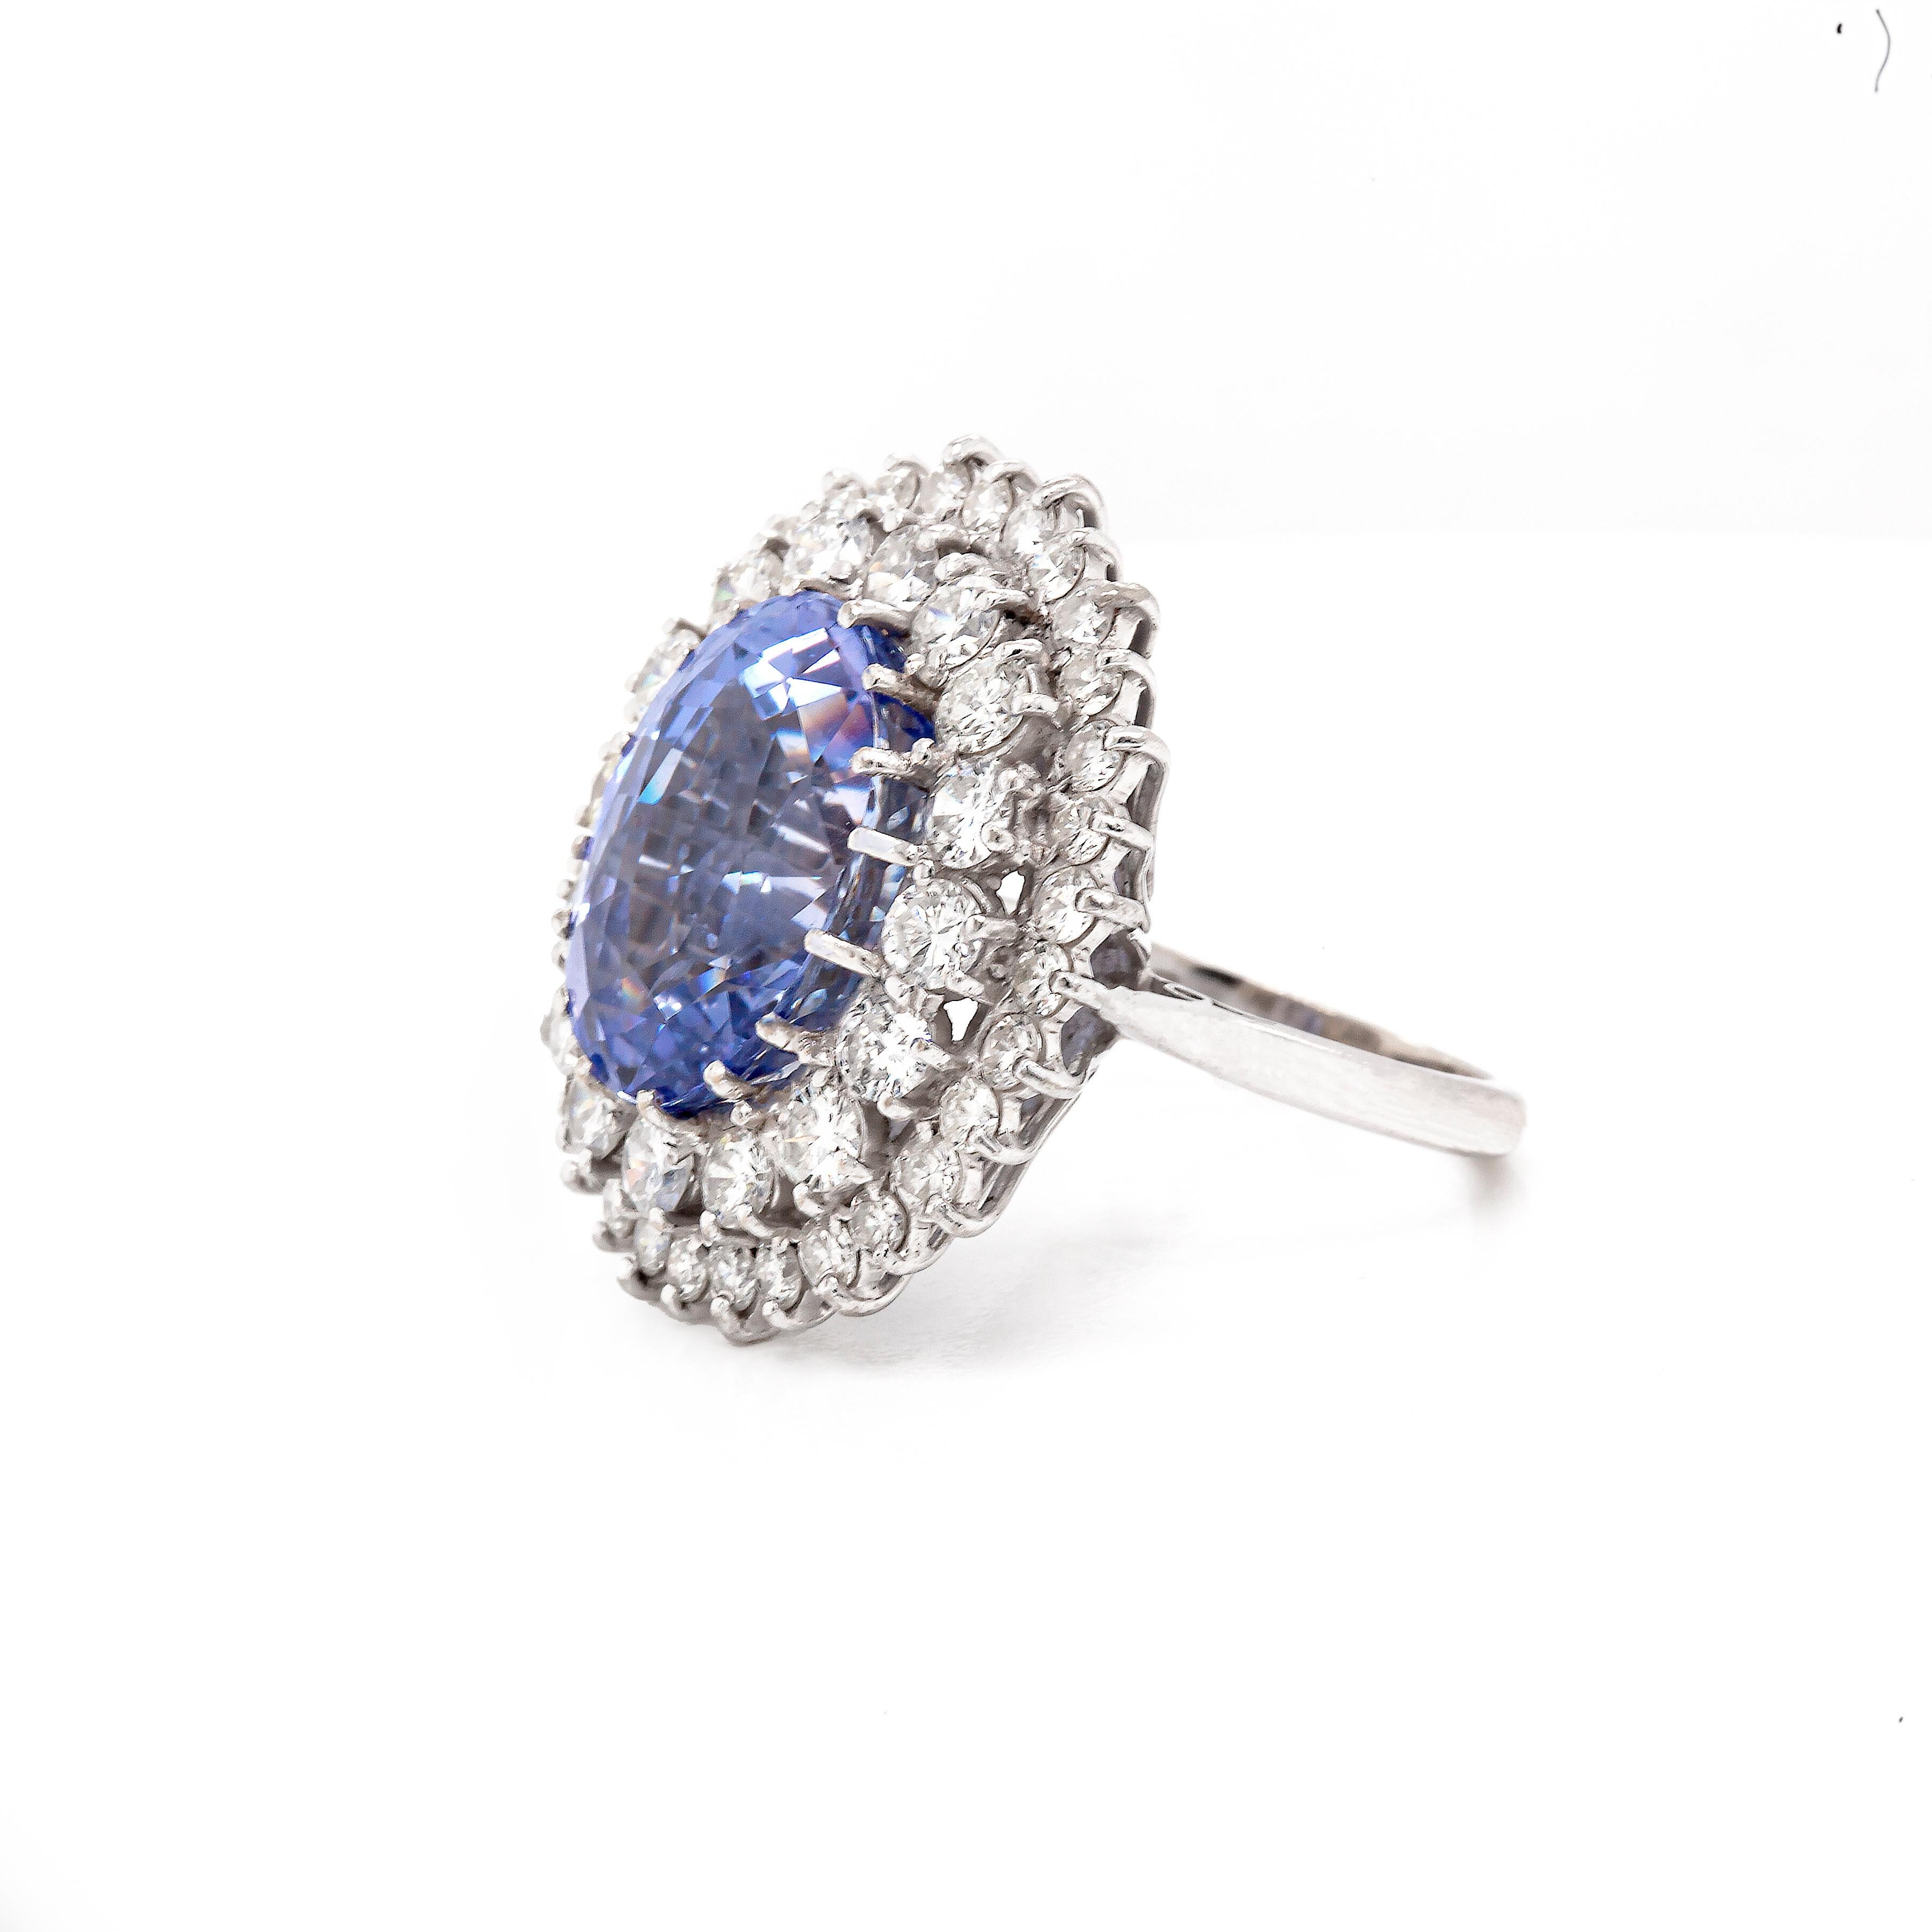 Oval Cut 17.17ct Natural Unheated Blue Sapphire and Diamond 18K White Gold Cocktail Ring For Sale